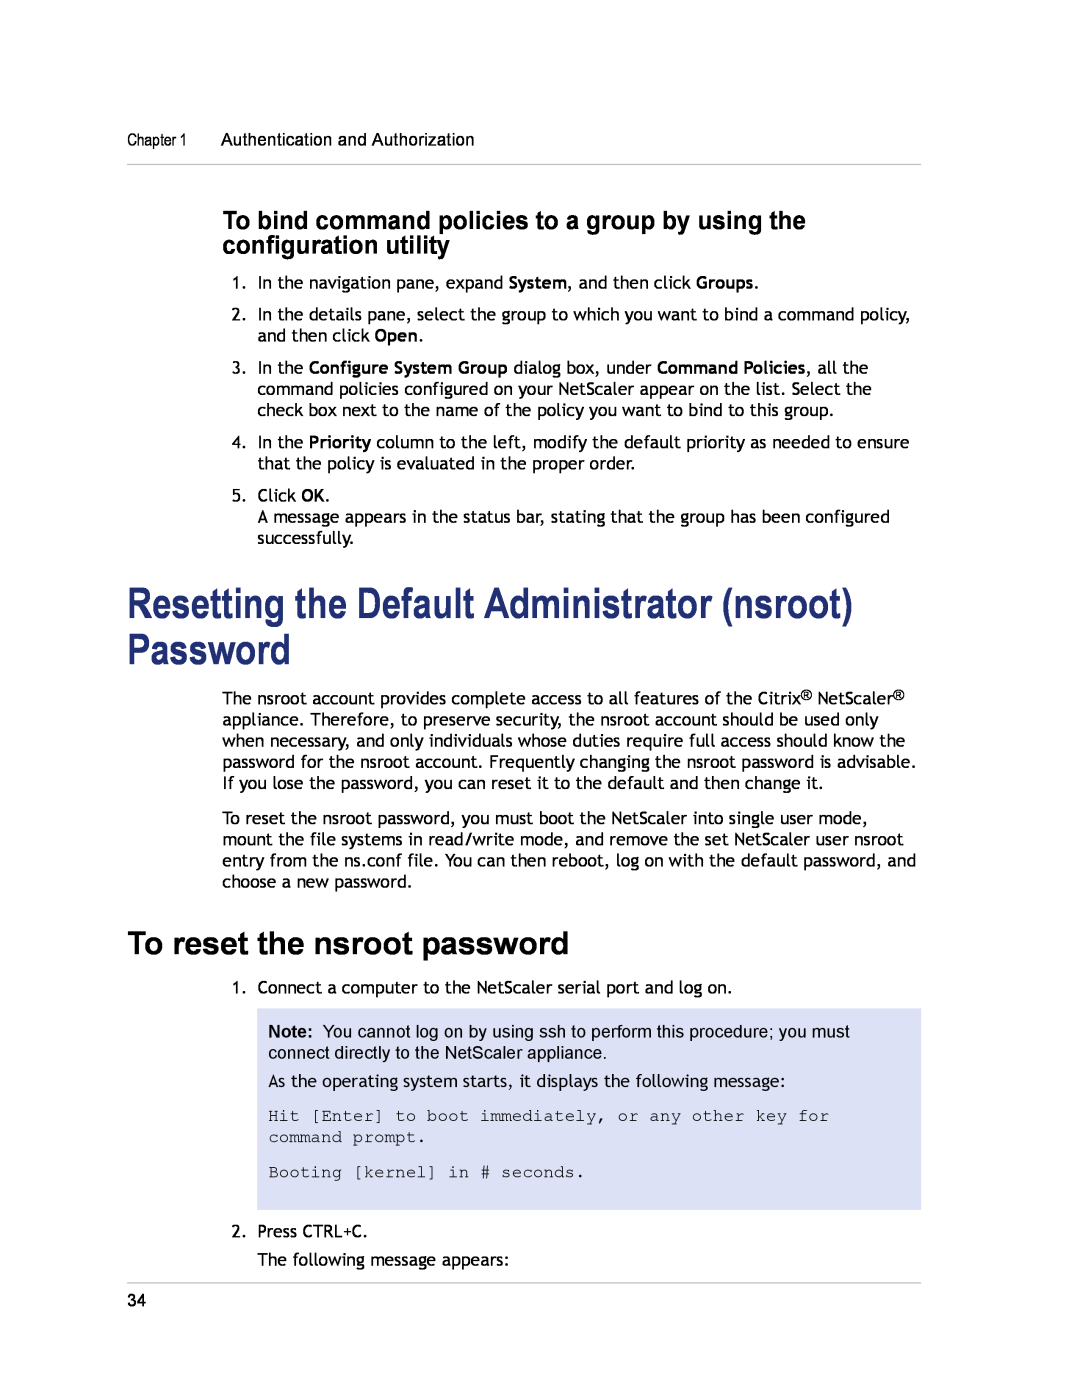 Citrix Systems CITRIX NETSCALER 9.3 Resetting the Default Administrator nsroot Password, To reset the nsroot password 